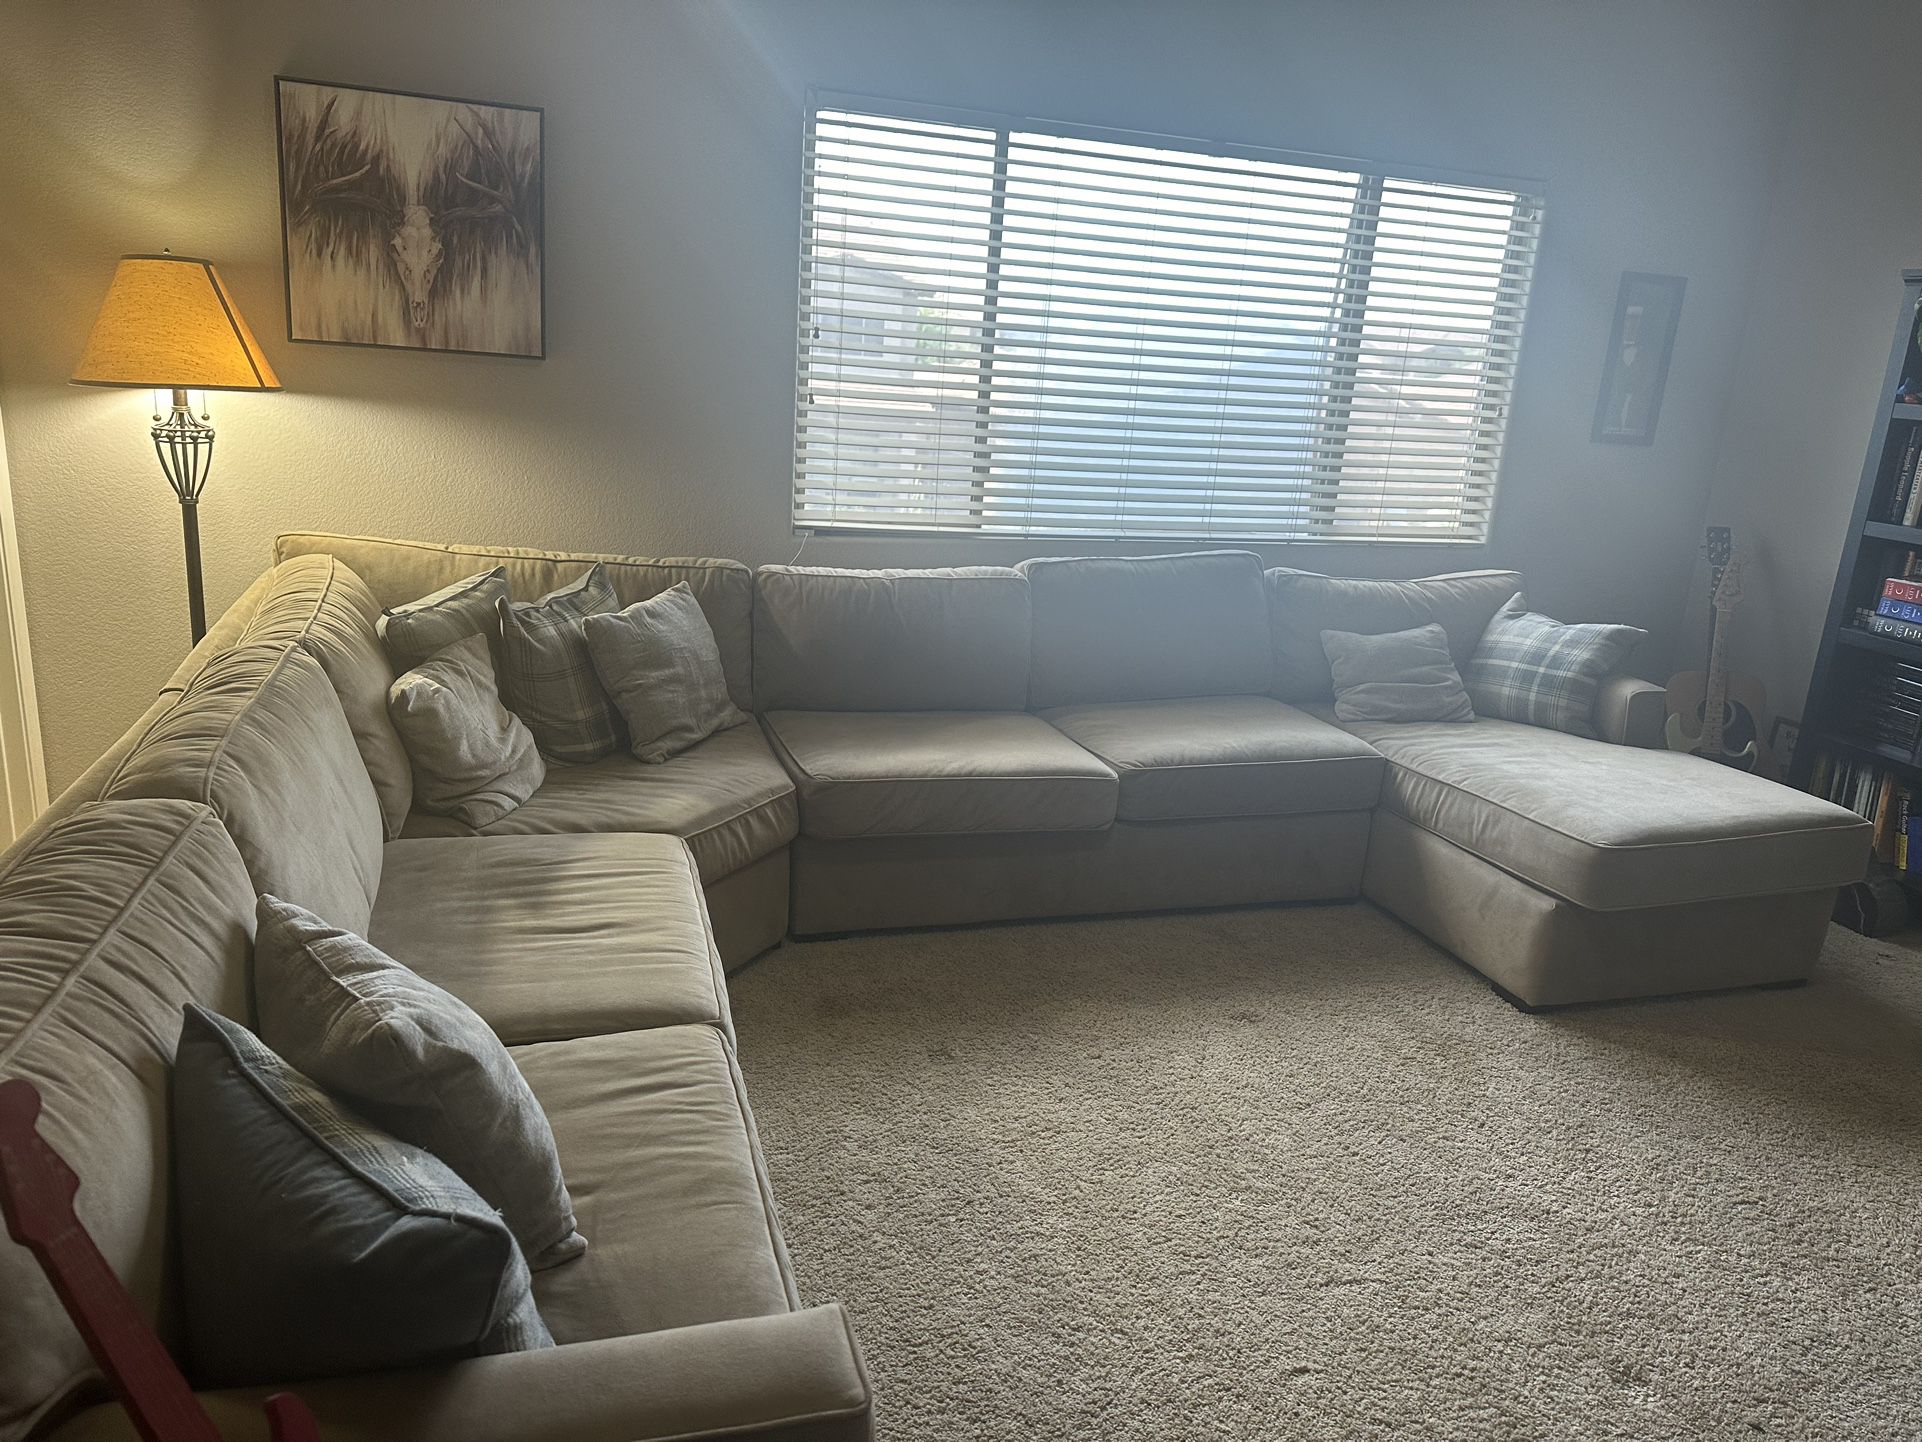 Sandy Brown Sectional Couch For Sale